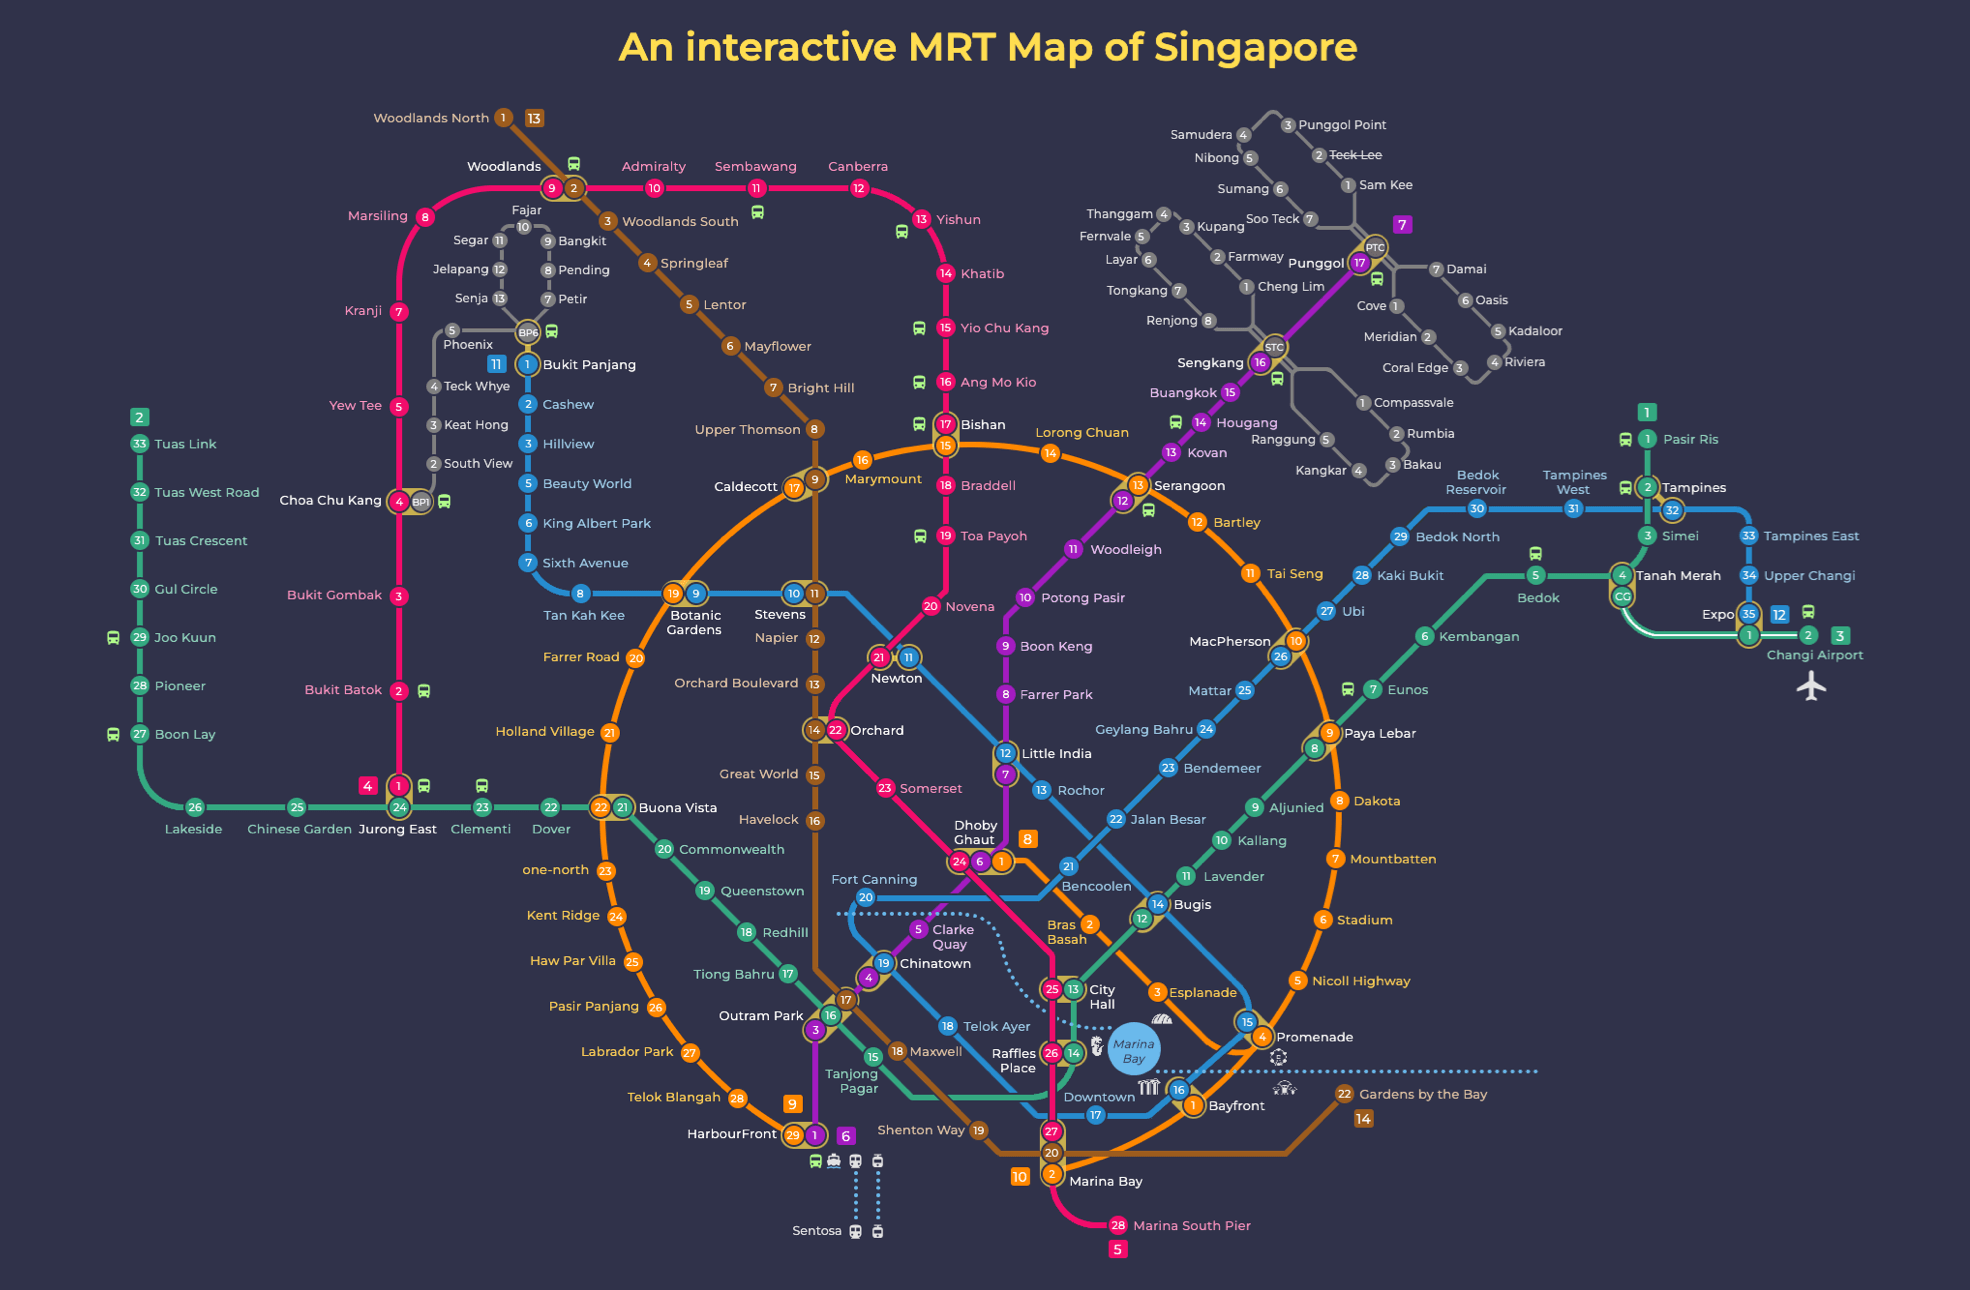 How many MRT lines are in Singapore